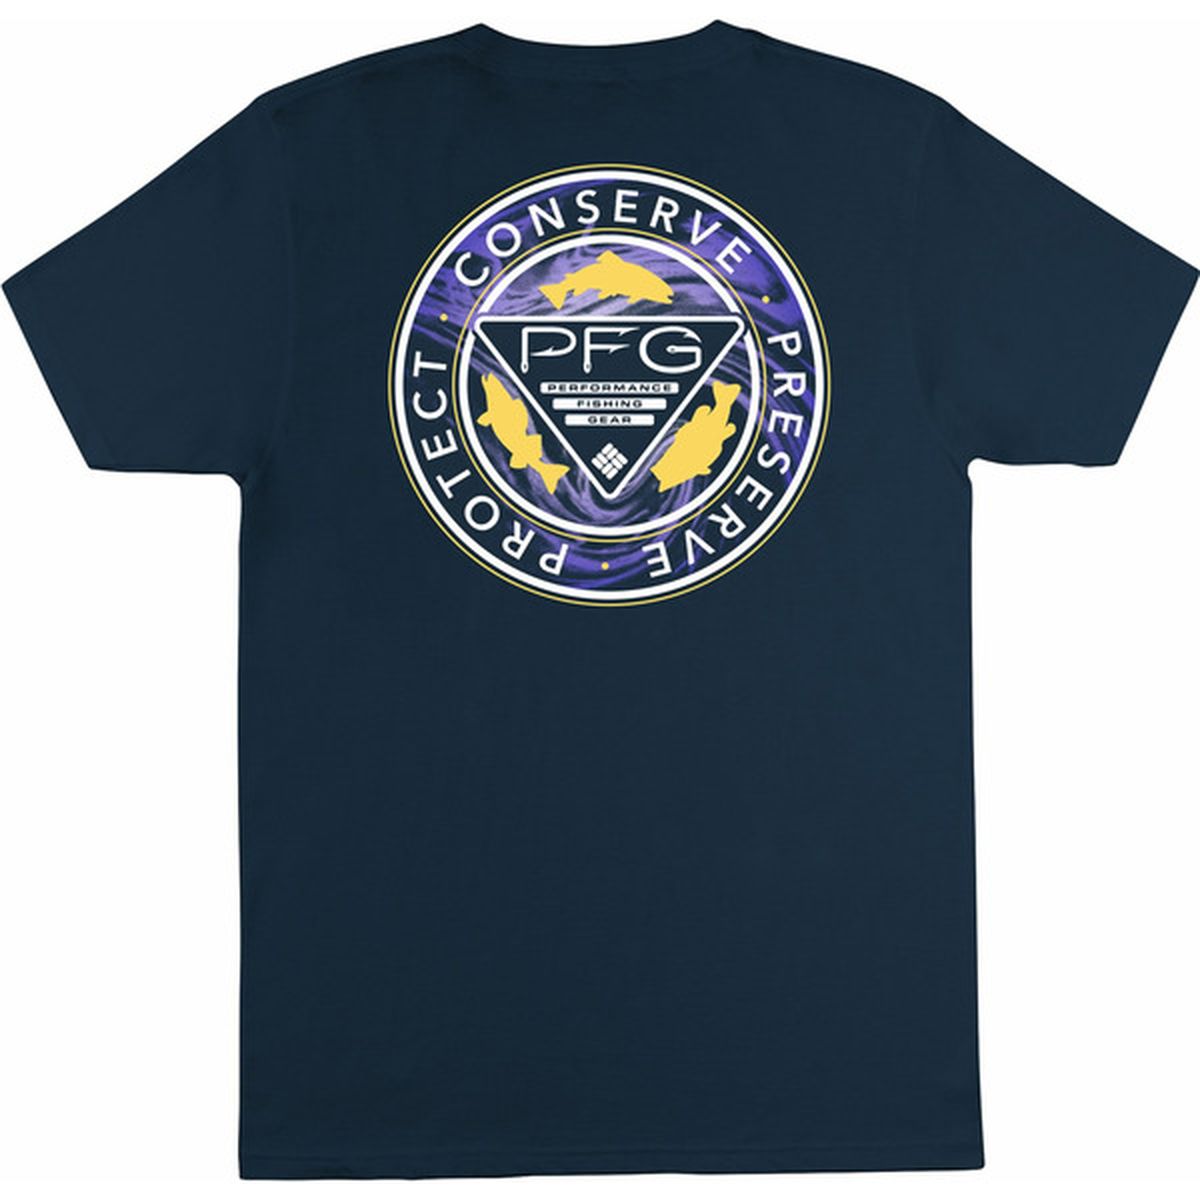 The Columbia Macaroni Company Men's Leyndell T-Shirt - Columbia Navy (each)  Delivery or Pickup Near Me - Instacart